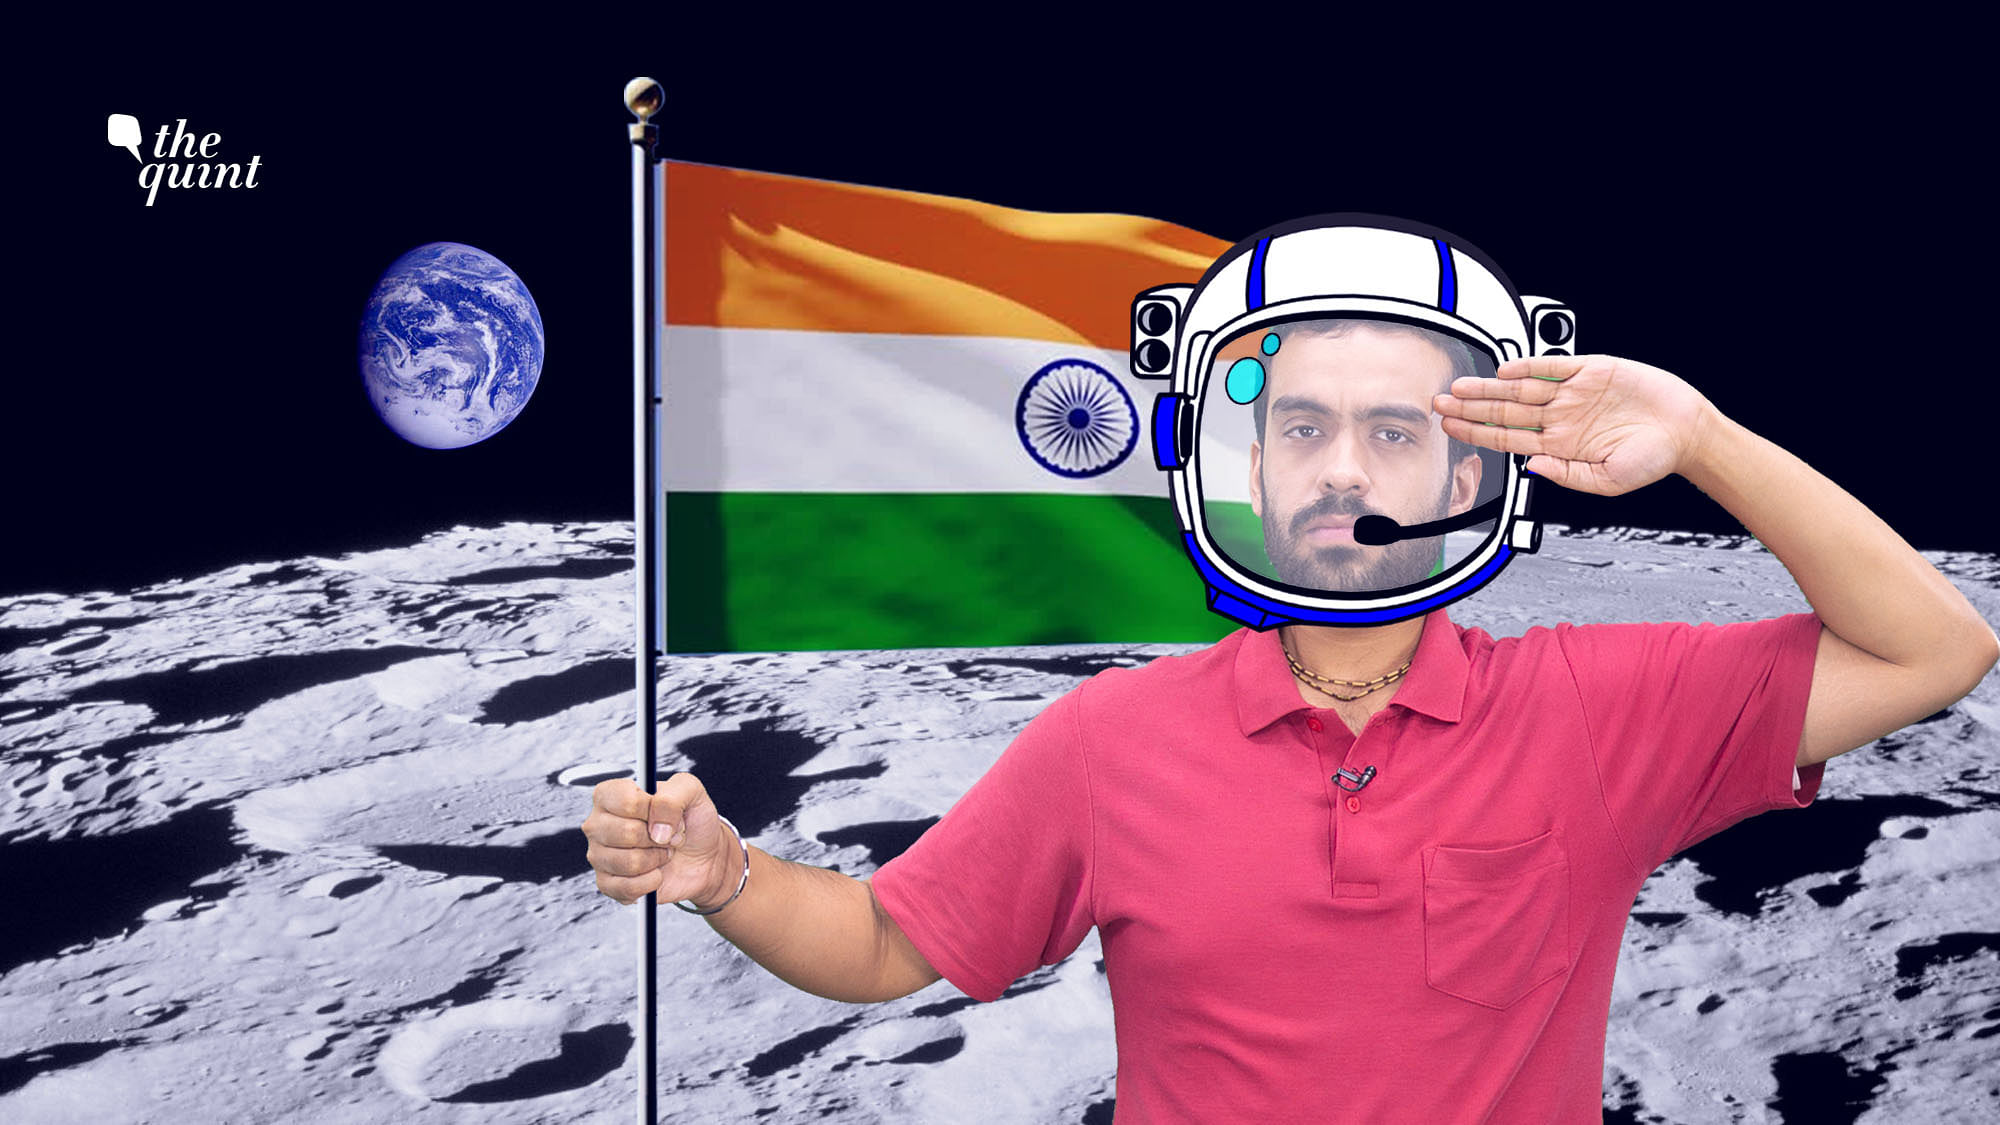 Now that the Chandrayaan 2 Mission launched by ISRO is set to land on the moon’s surface, the big question is – can anyone really claim ownership over its land or resources?